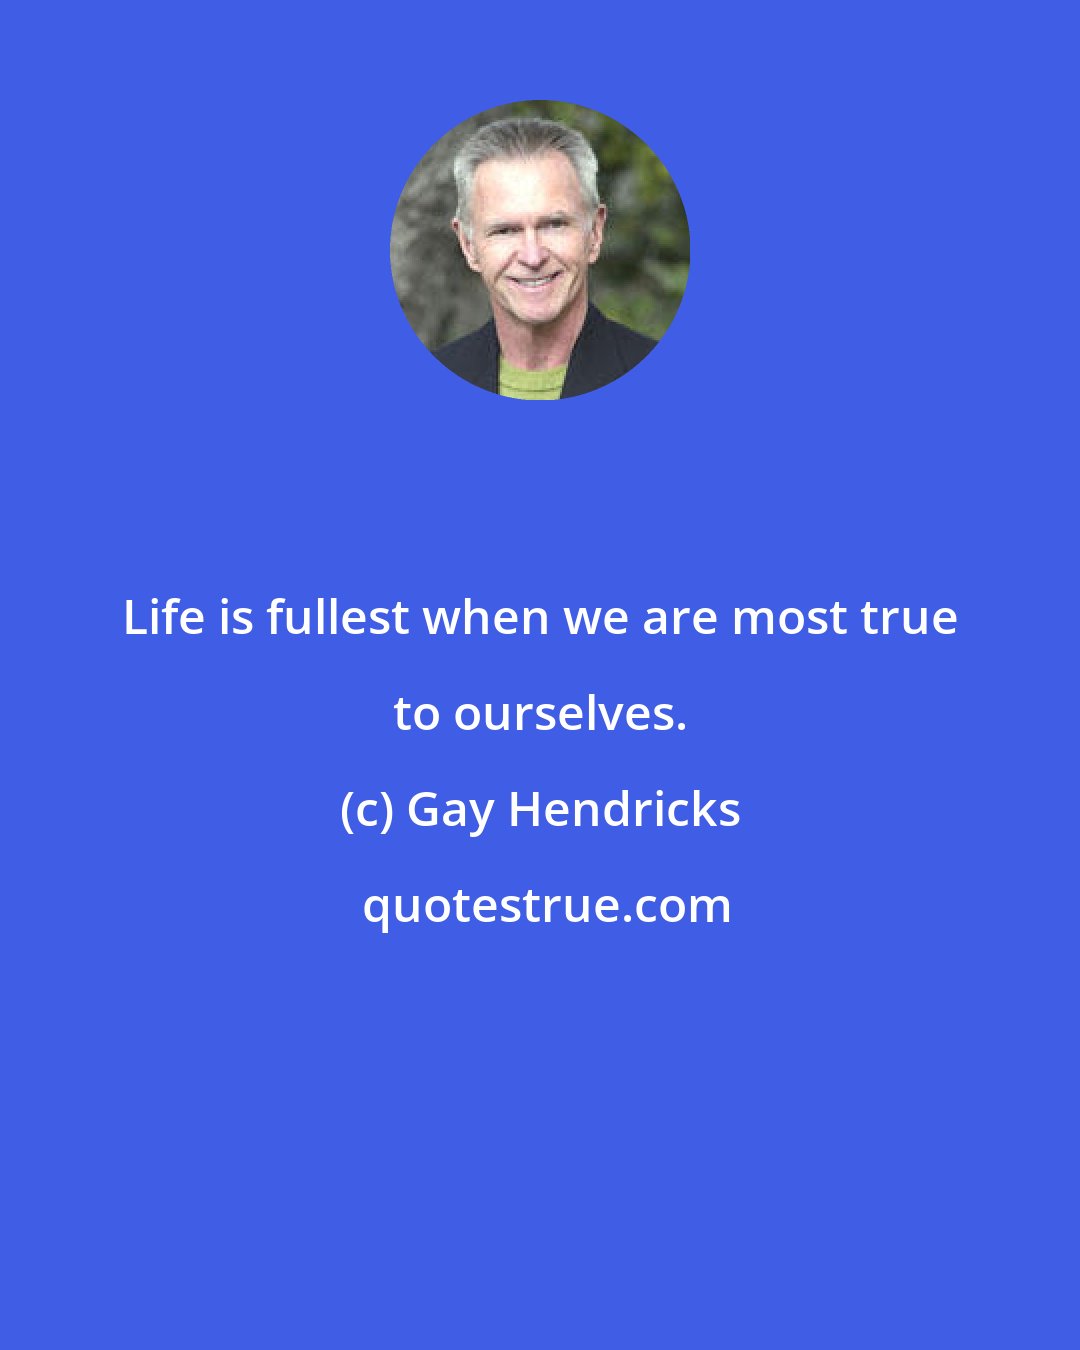 Gay Hendricks: Life is fullest when we are most true to ourselves.